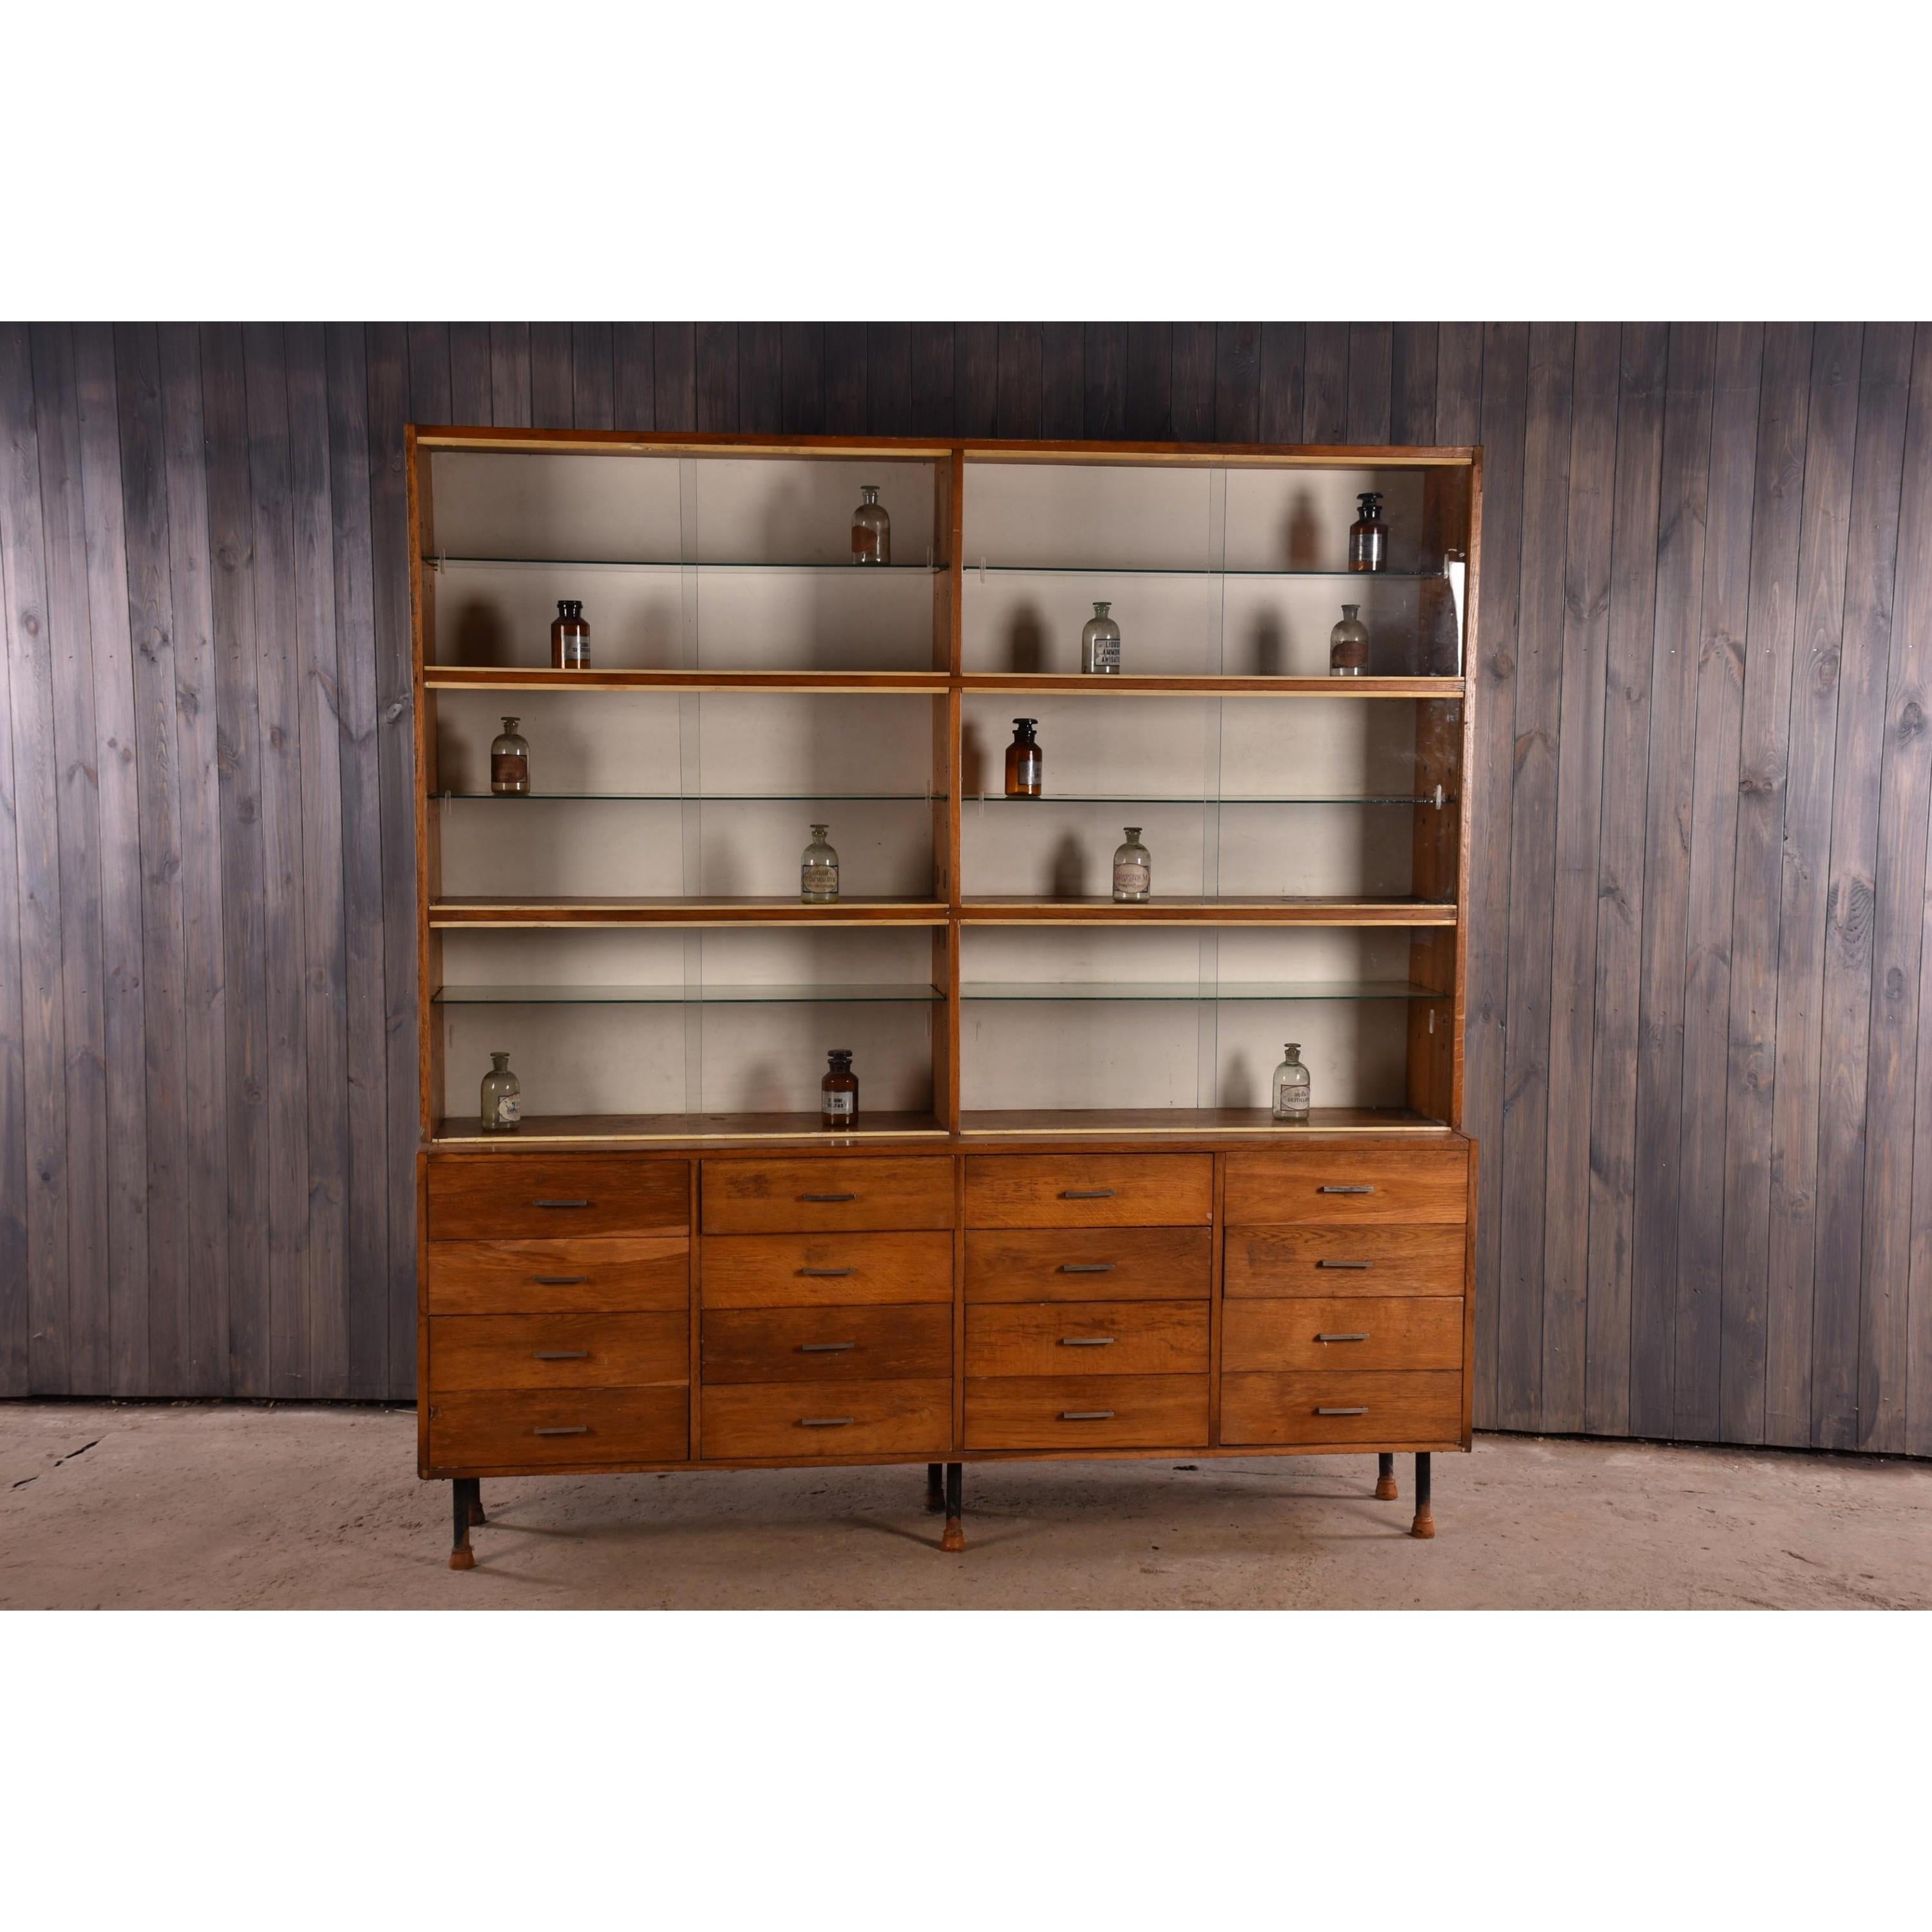 Industrial Apothecary Haberdashery Display Cabinet circa 1930s Number 11